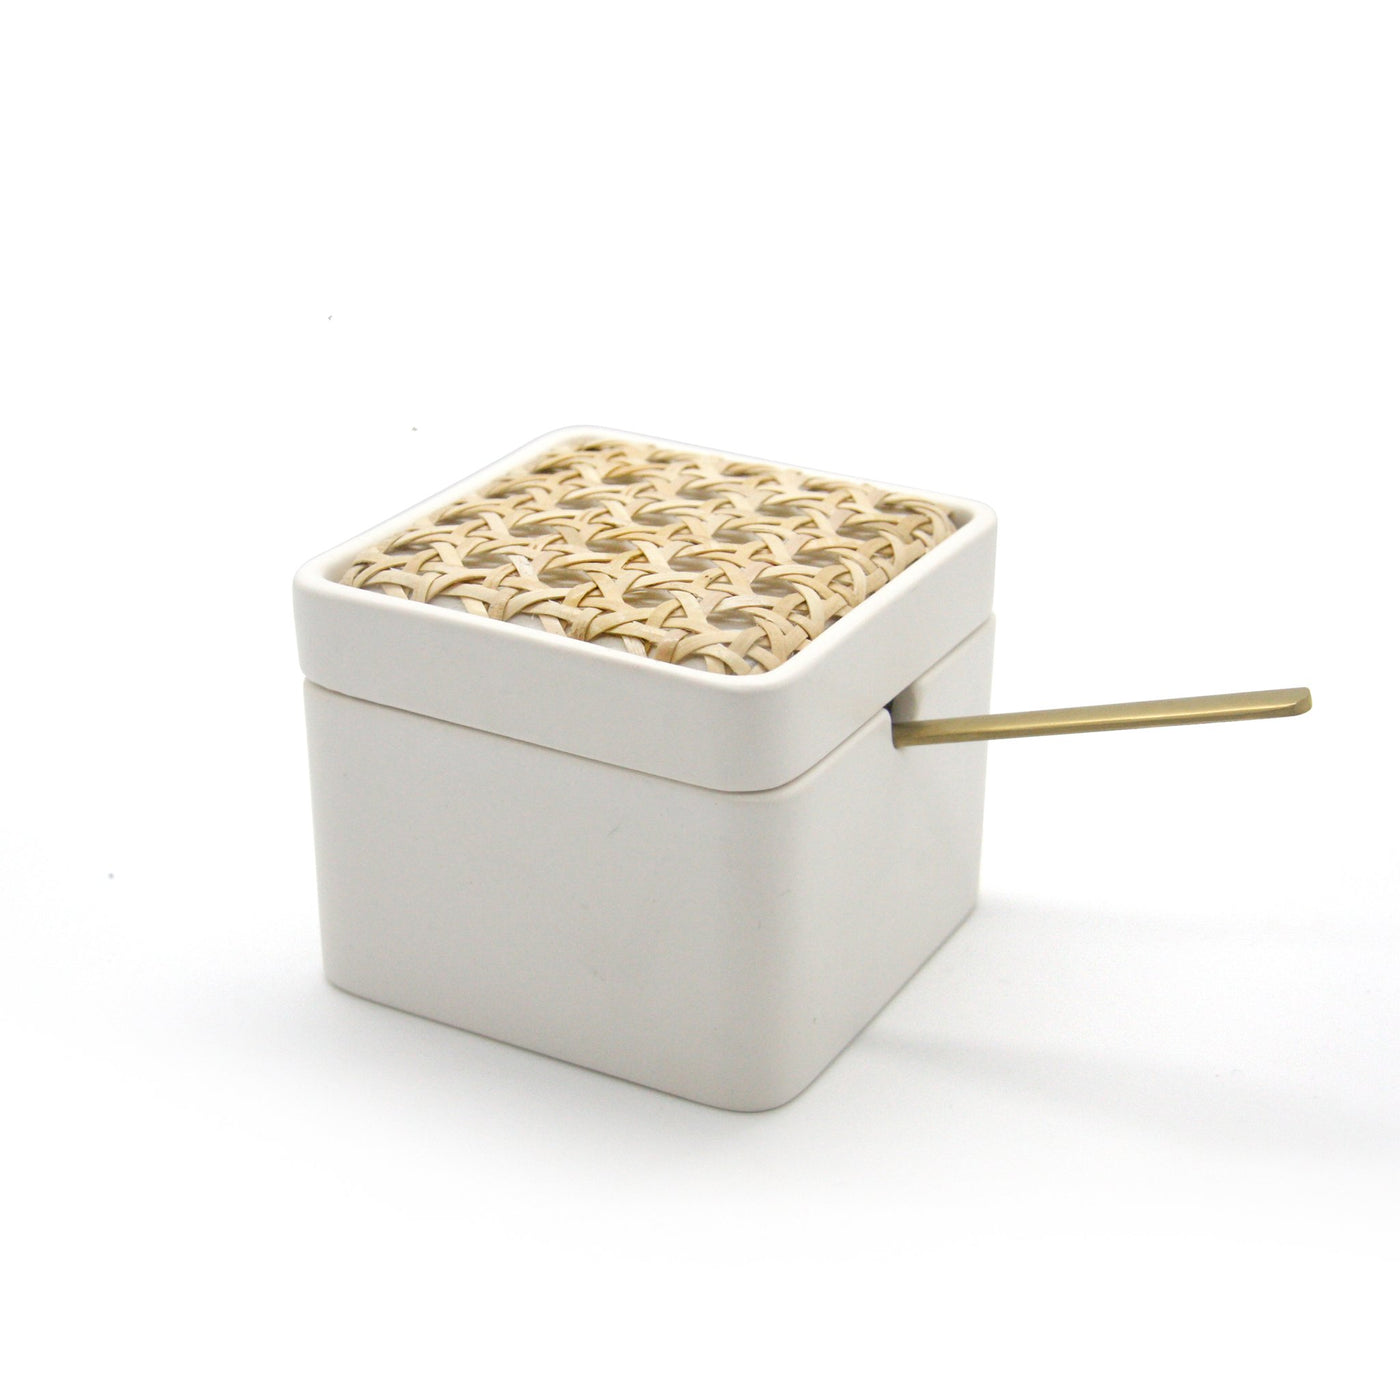 White Viennese Braid Concrete Box-Storing and Organising-BOXES / ORGANISERS / CONTAINERS, CONCRETE, COOKING/SERVING TOOLS, CUTLERY / TOOLS, TABLEWARE-Forest Homes-Nature inspired decor-Nature decor